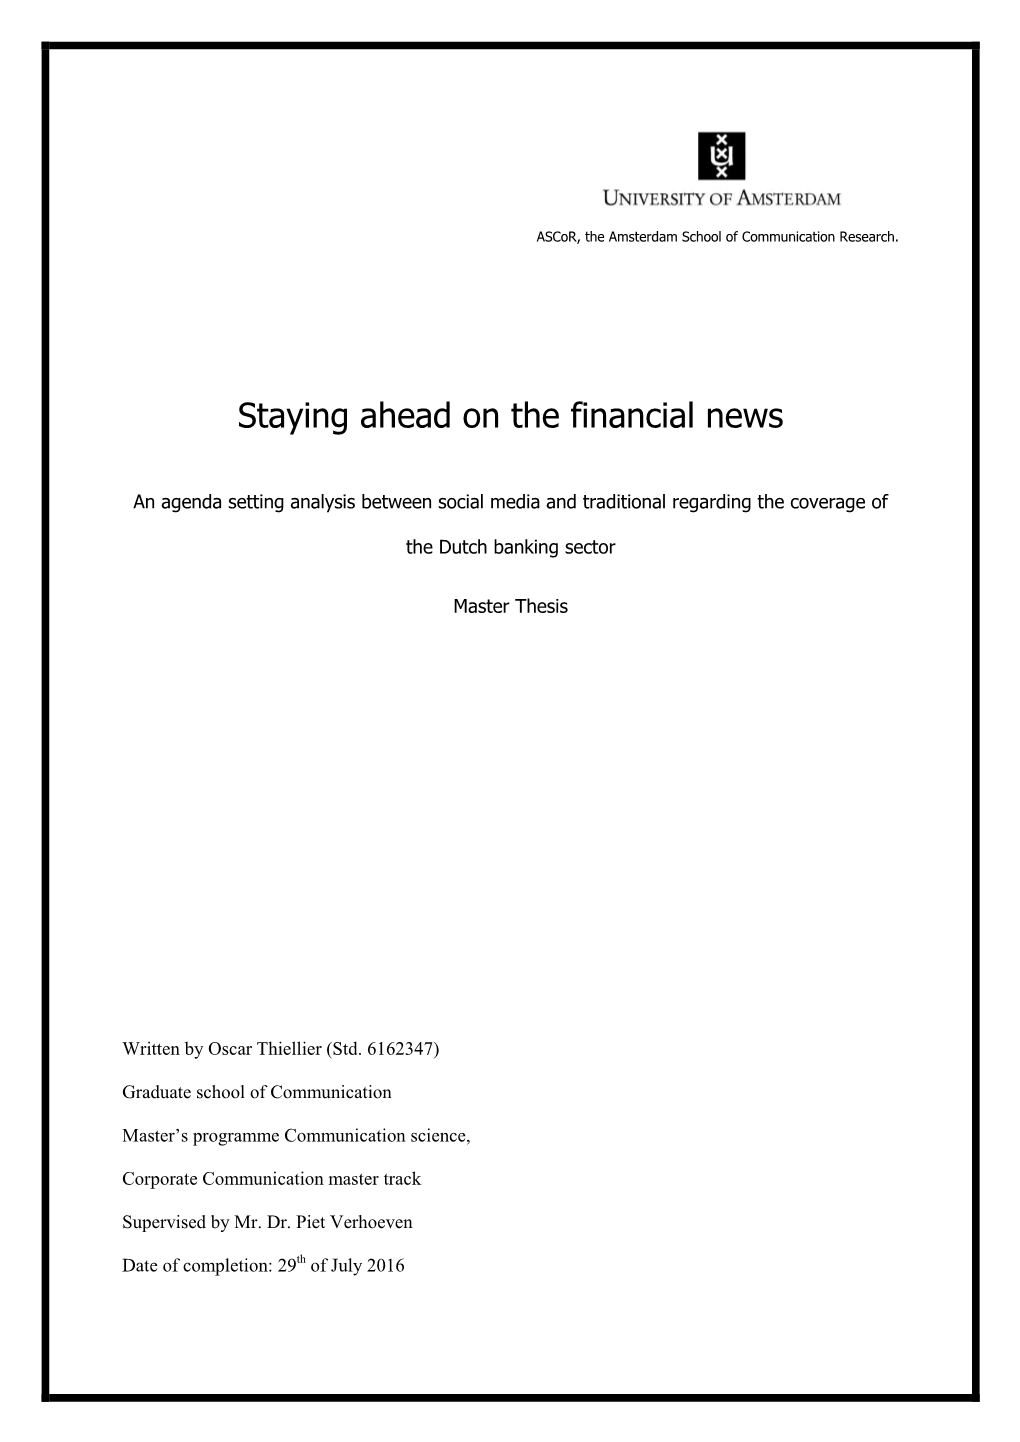 Staying Ahead on the Financial News